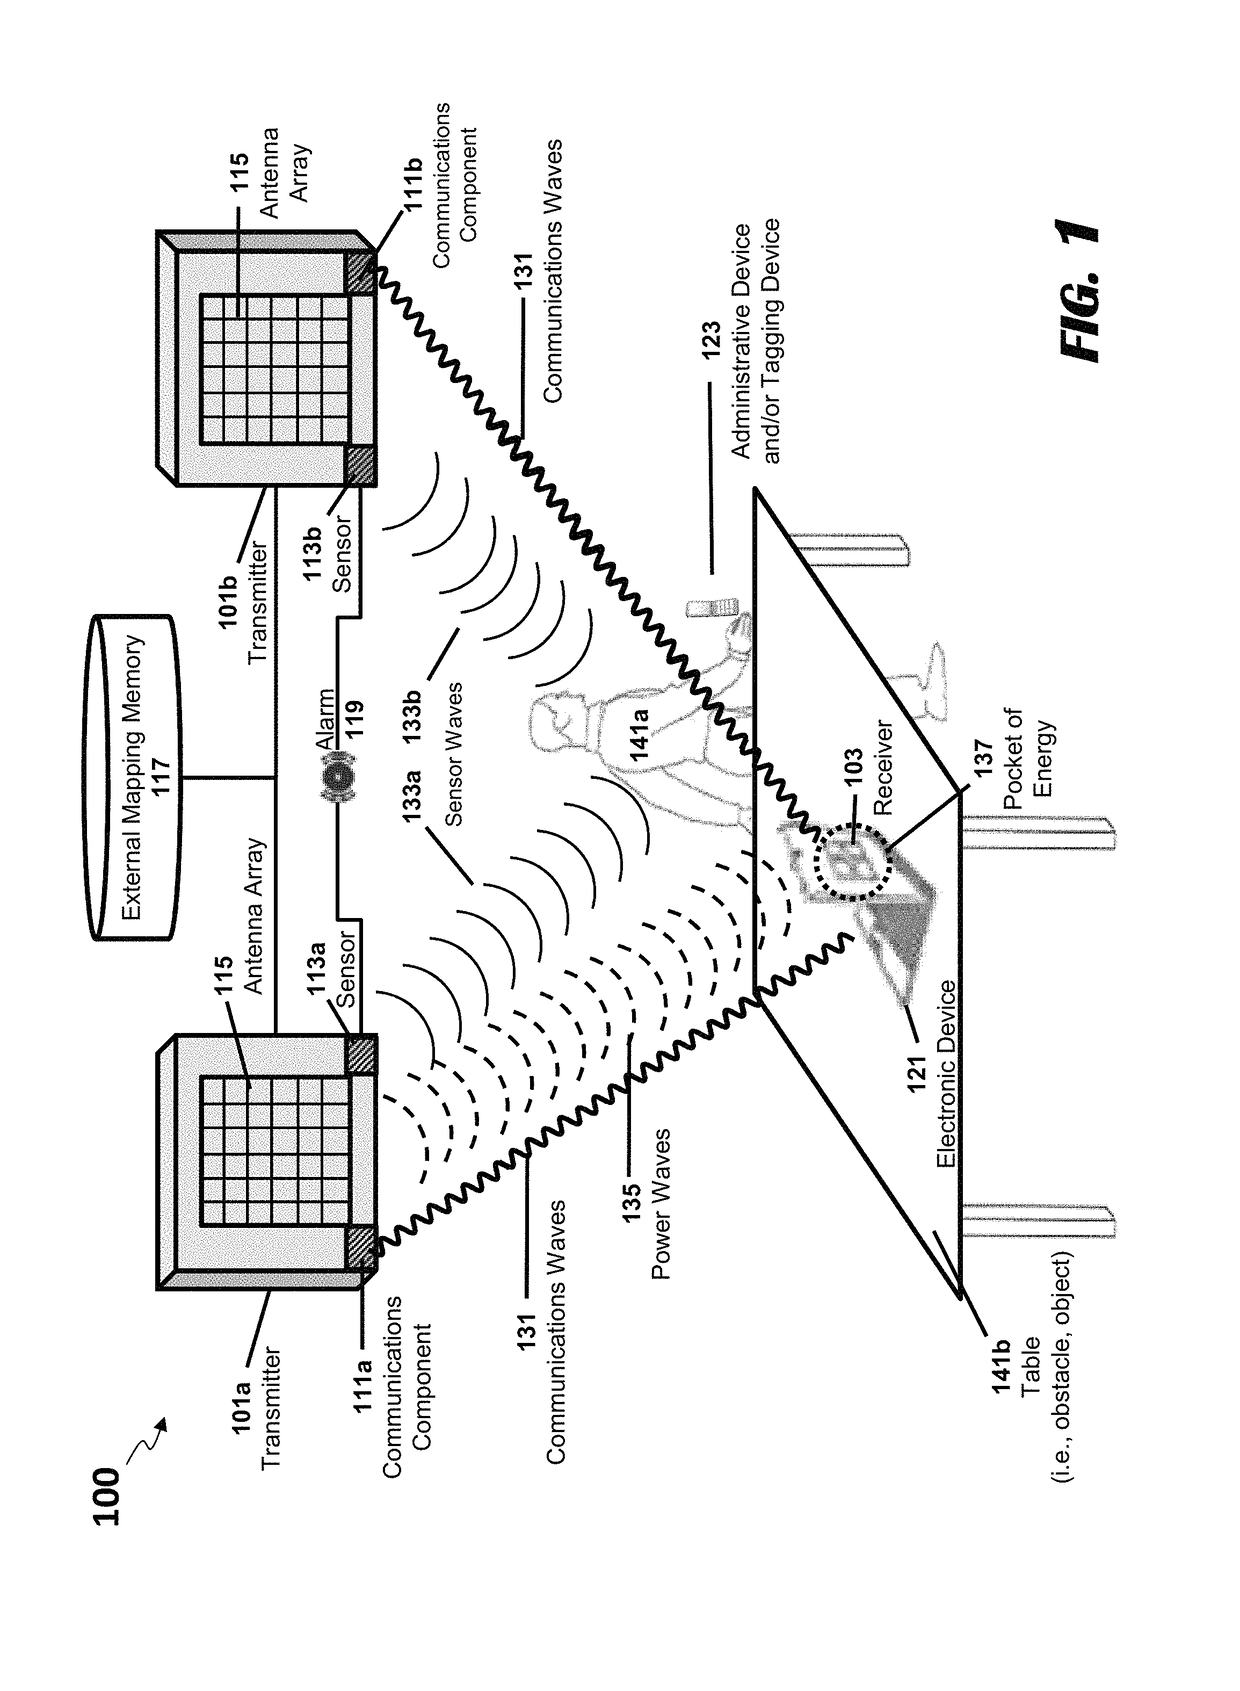 Systems and methods for identifying receivers in a transmission field by transmitting exploratory power waves towards different segments of a transmission field